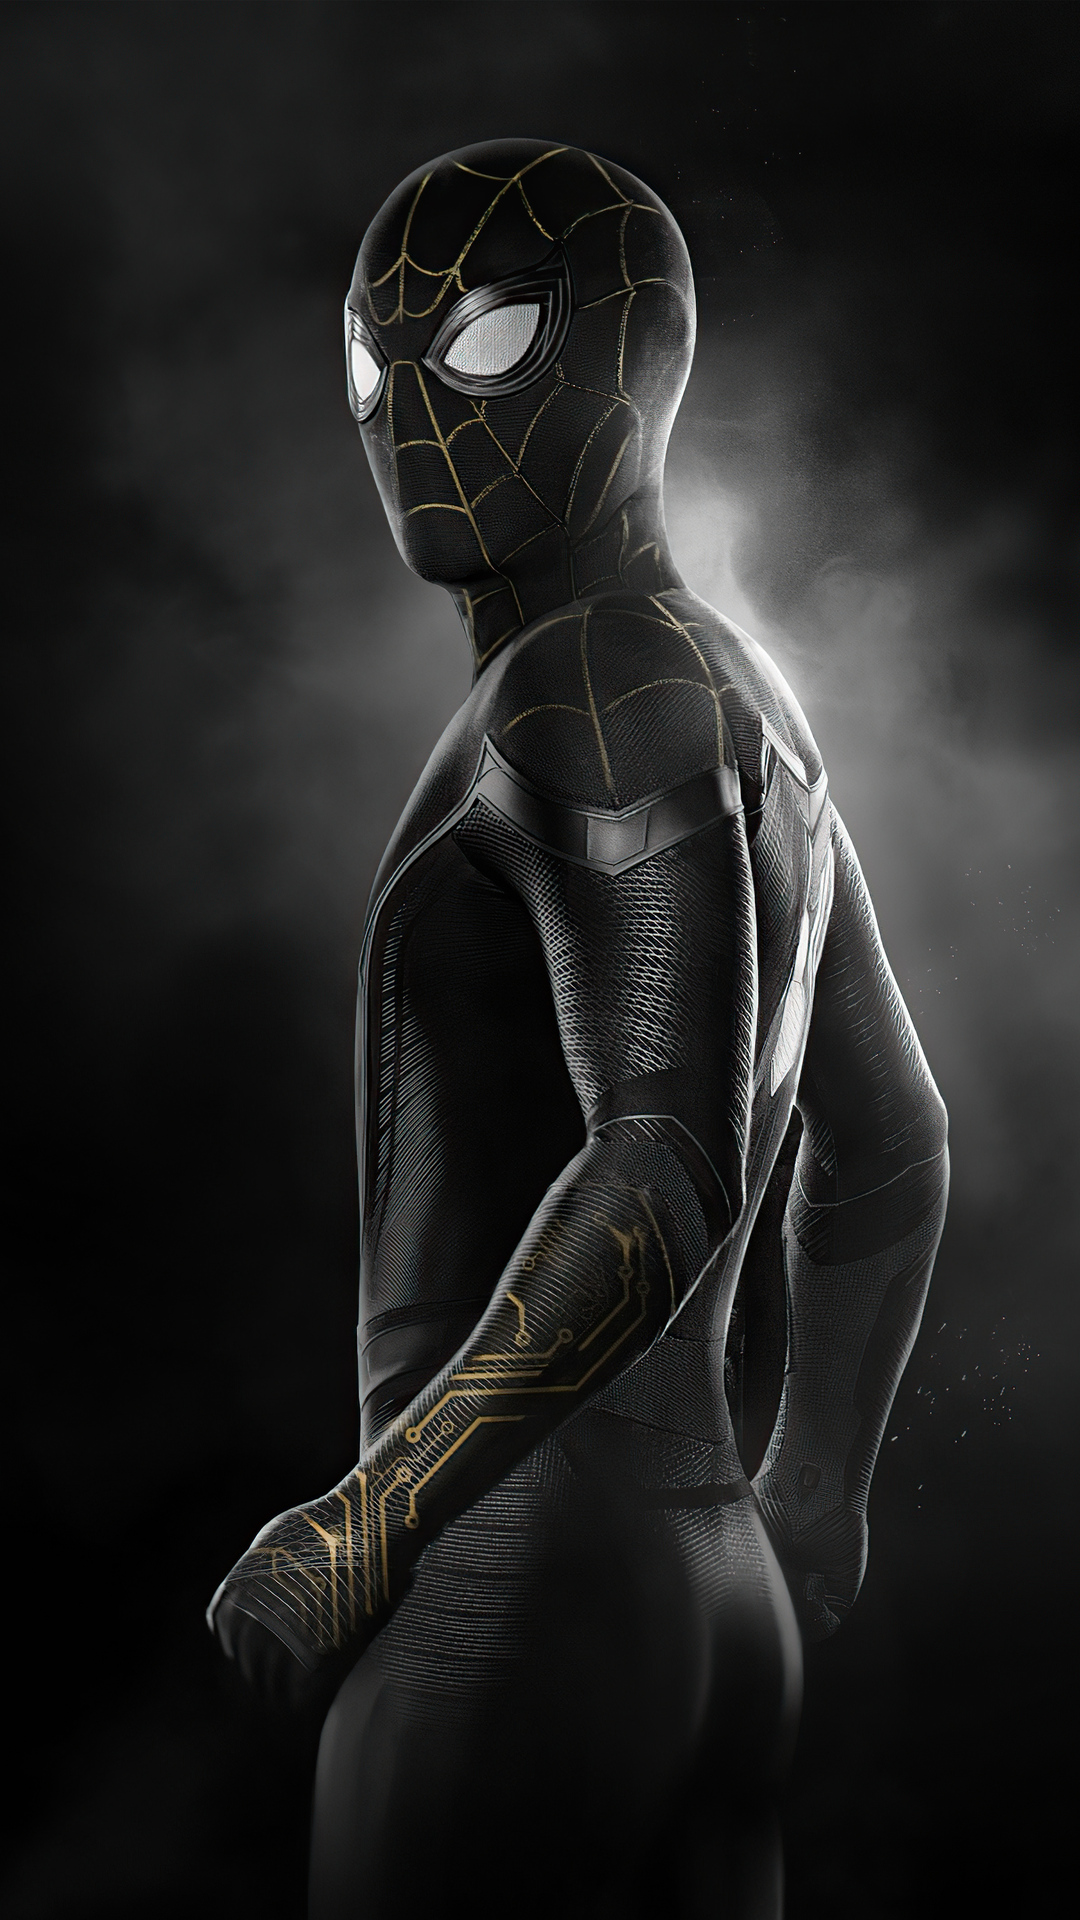 1080x1920 Spider Man No Way Home Black Gold Suit 4k Iphone 7,6s,6 Plus,  Pixel xl ,One Plus 3,3t,5 HD 4k Wallpapers, Images, Backgrounds, Photos and  Pictures